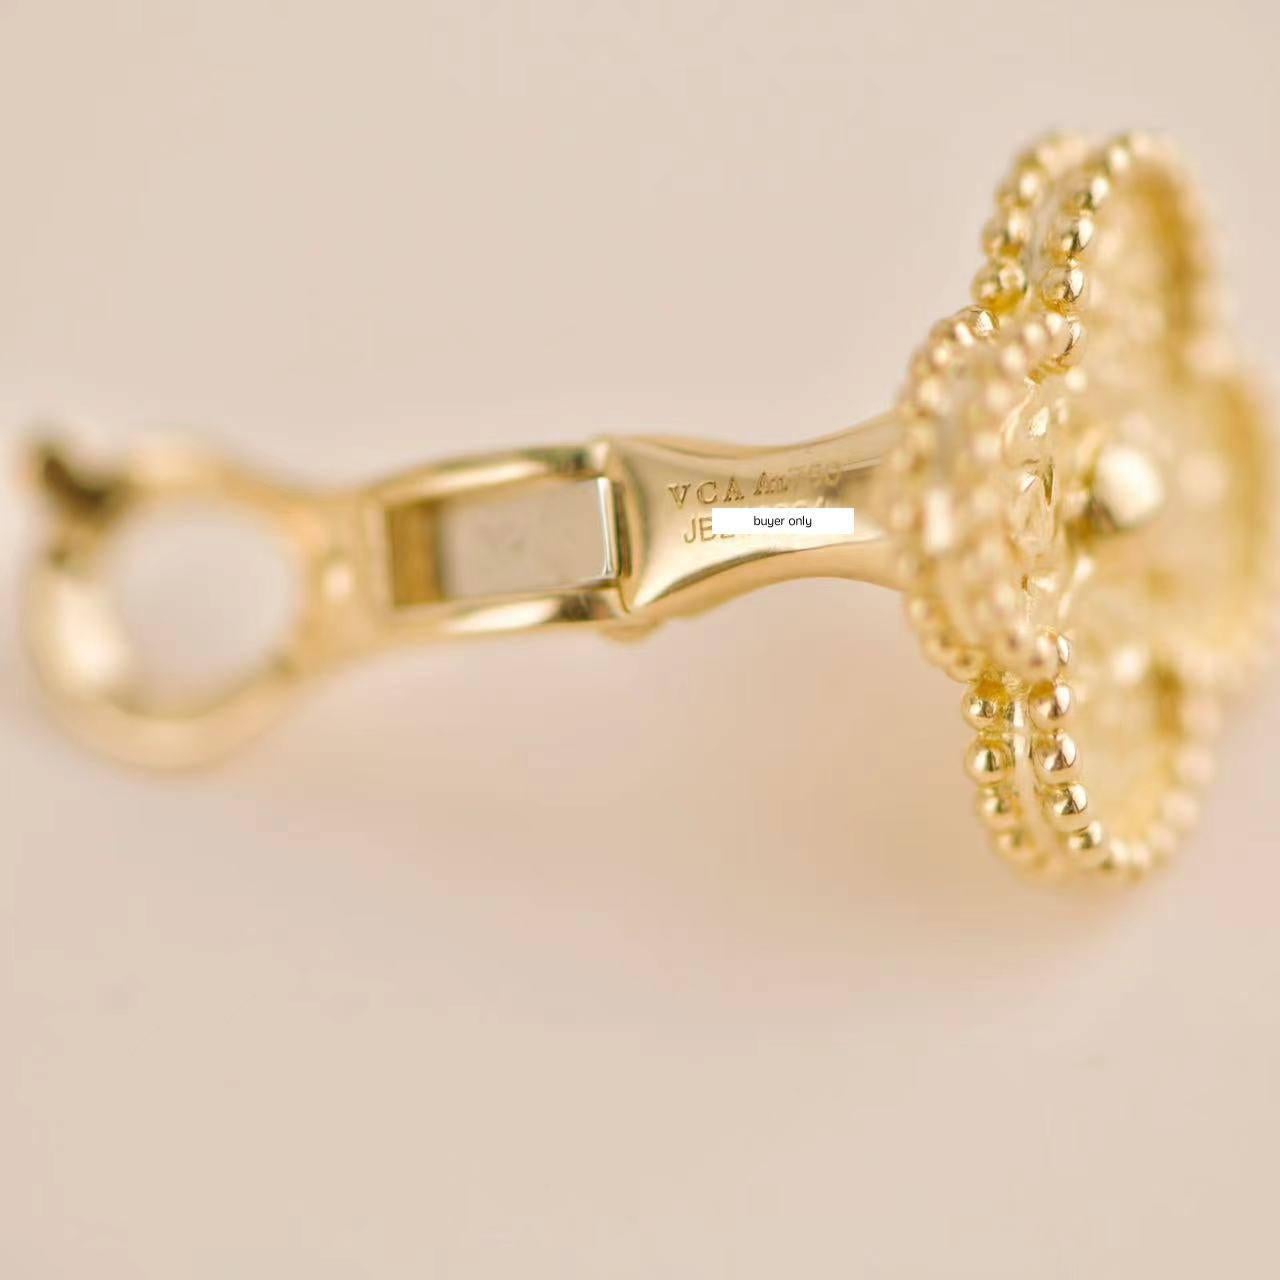 Van Cleef & Arpels Vintage Alhambra Hammered 18K Yellow Gold Earrings In Excellent Condition For Sale In Banbury, GB